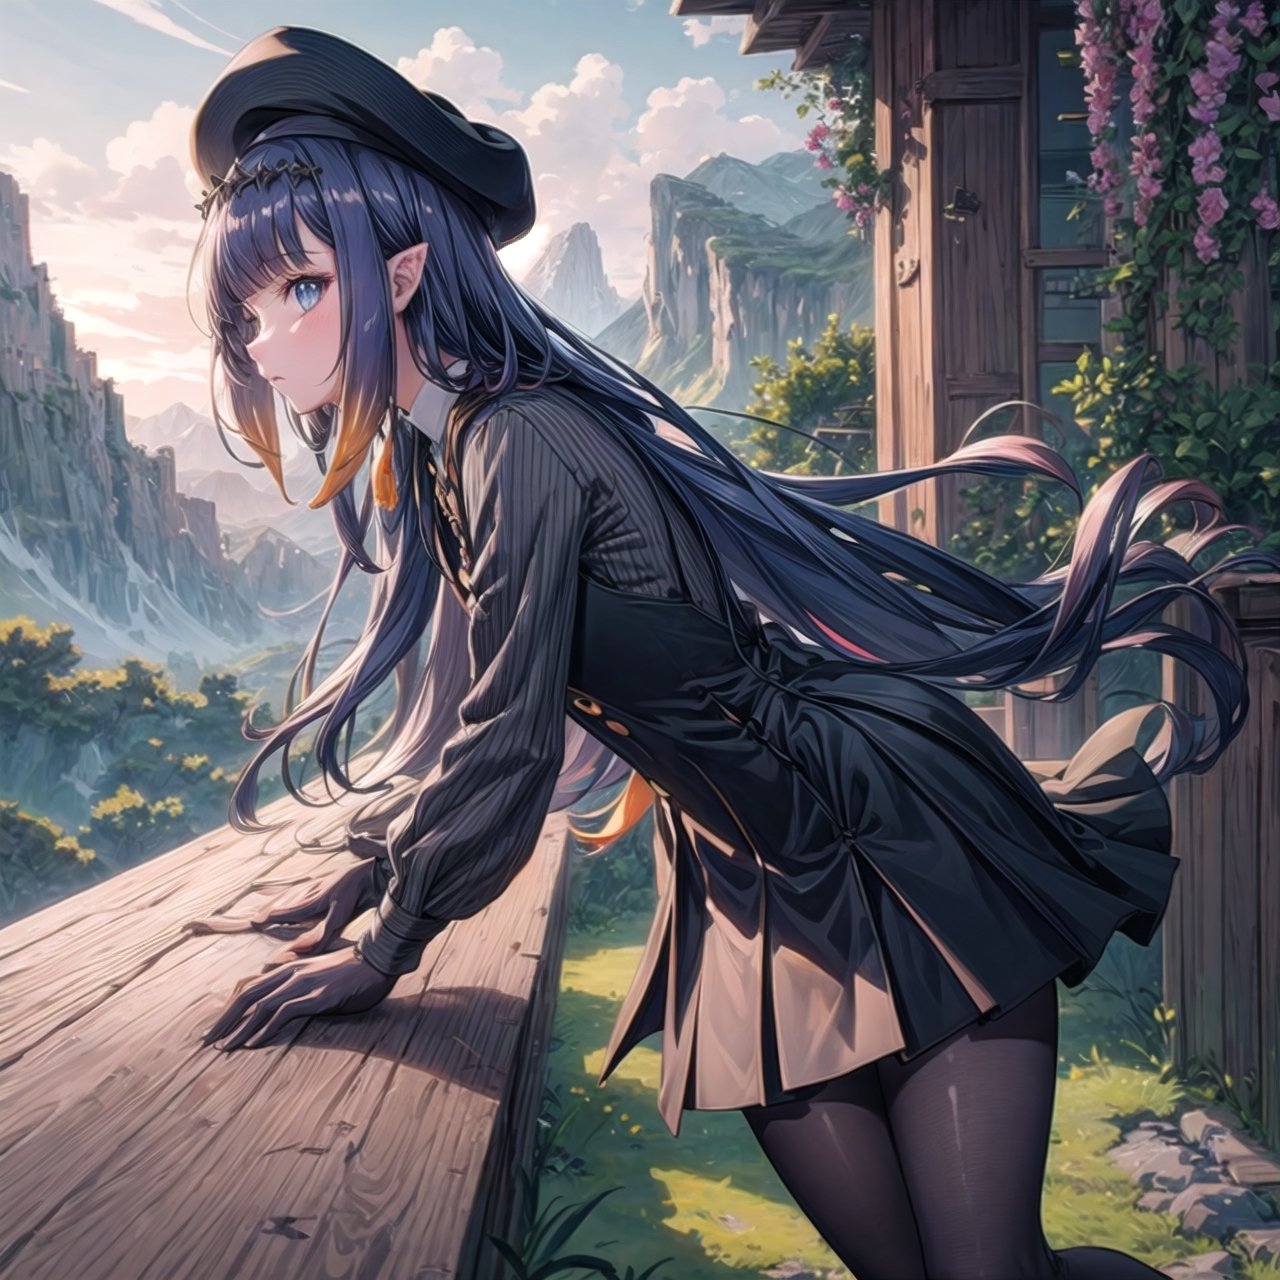 //Quality
(((best quality, 8k wallpaper))), ((detailed eyes, detailed illustration, masterpiece, ultra-detailed)),

//Charater
1girl, solo, ninomae ina'nis, bangs, inapainter, pinafore dress, beret, pantyhose

// Pose
profile, in_profile, upper body, (dynamic angle), 

// Background
balcony scenery, blue cloudy sky scenery, plants and flowers, mountains scenery